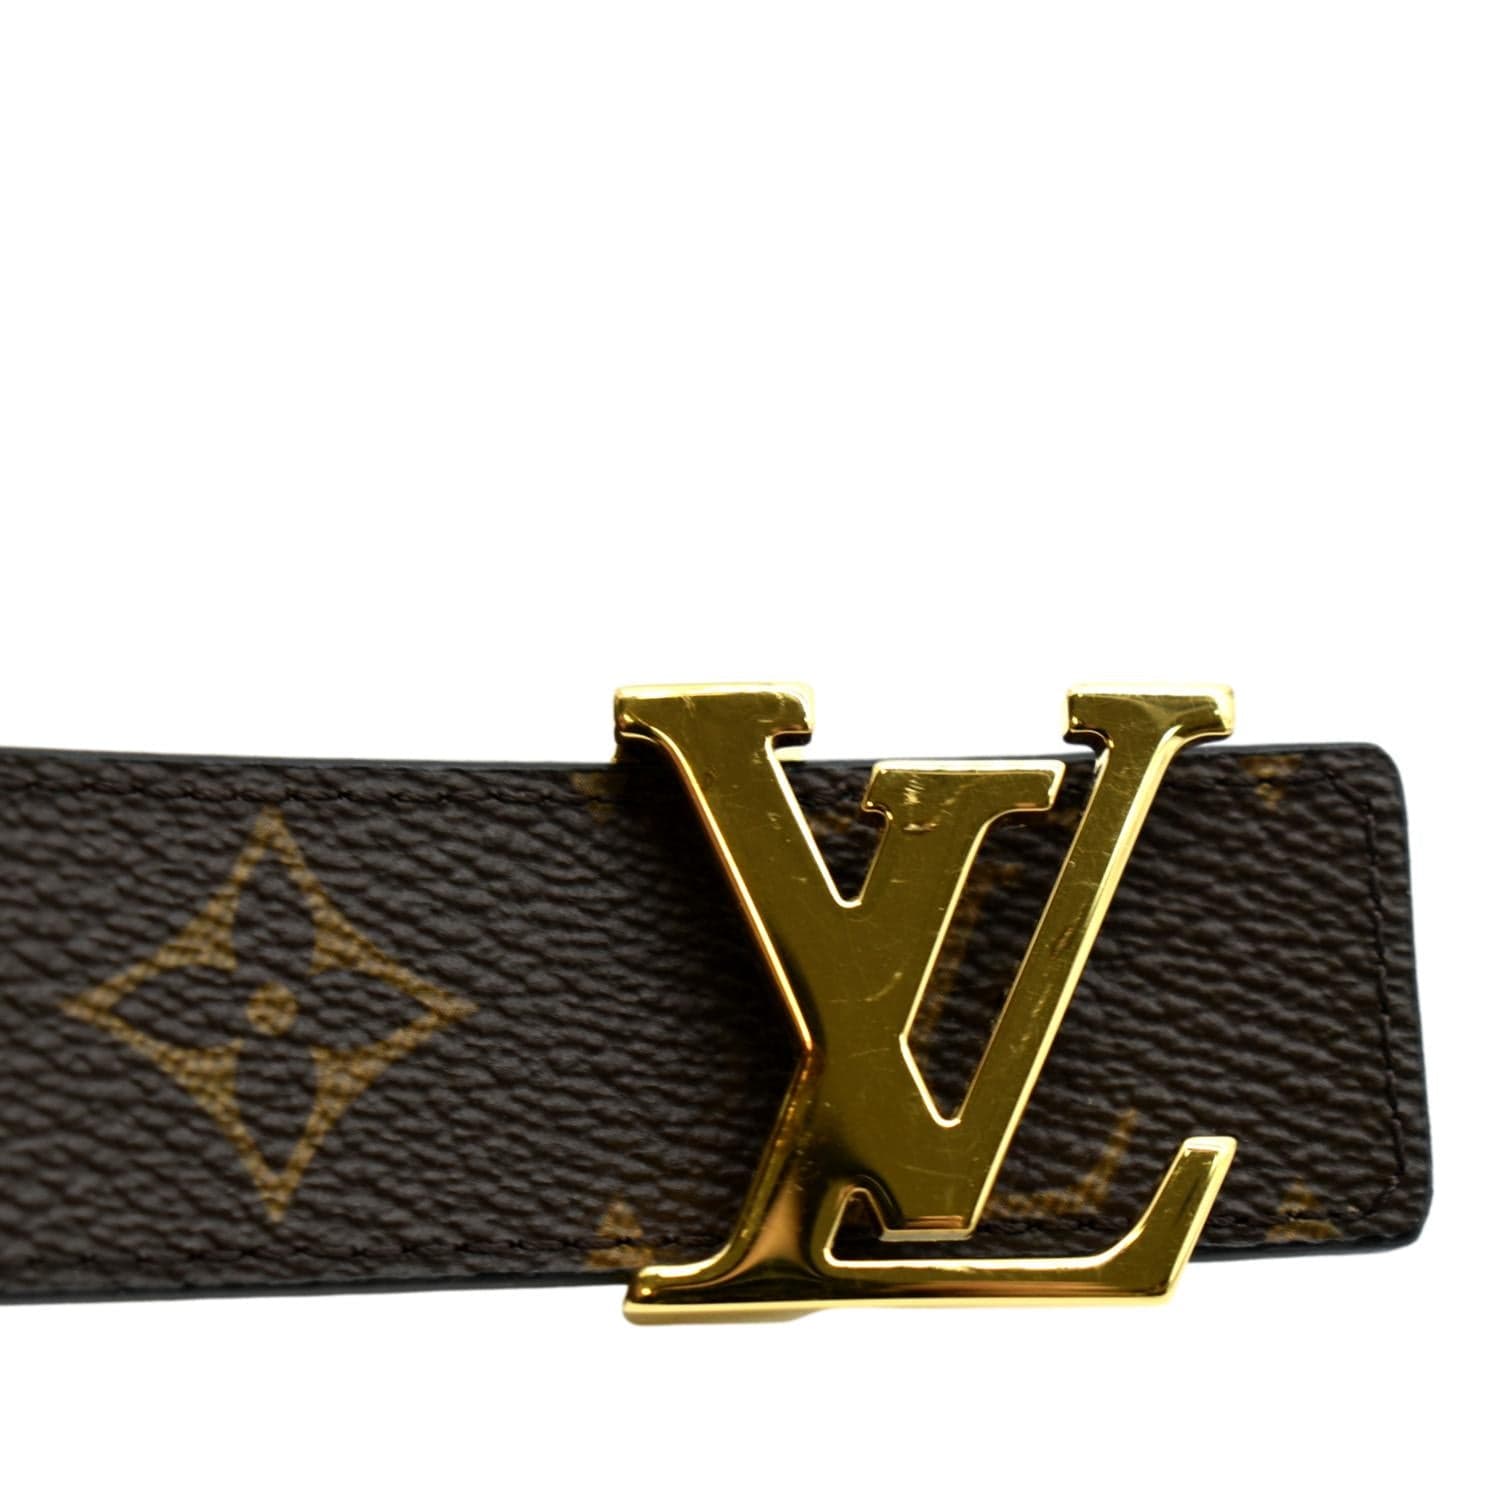 LOUIS VUITTON Black Leather Buckle Belt with Gold LV Logo Size 85